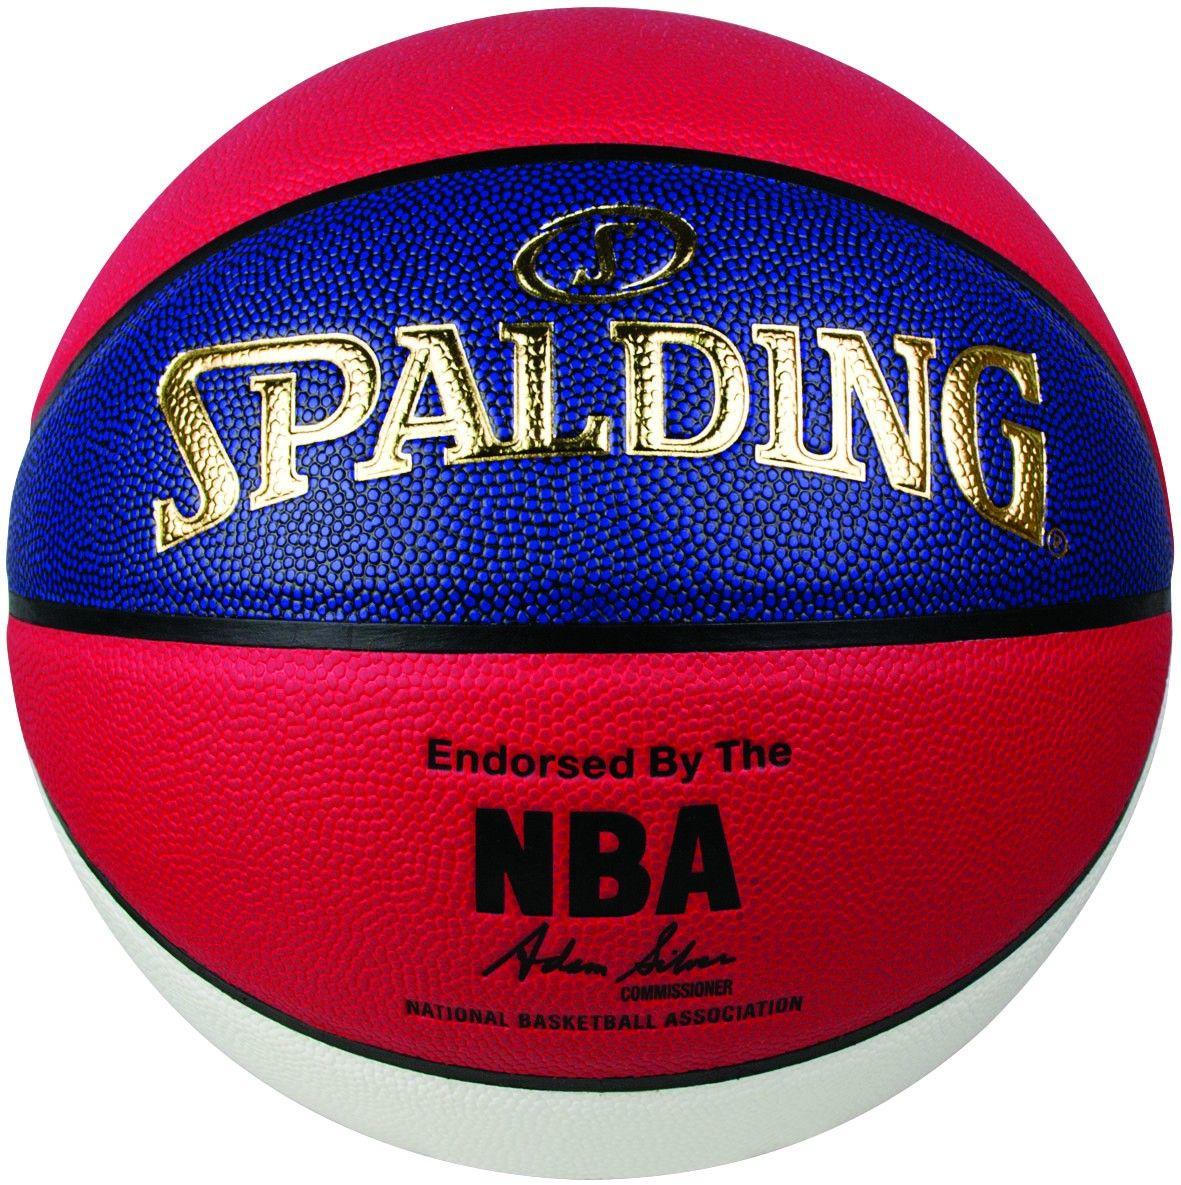 Red and Blue Basketball Logo - NBA Logoman - Red/White/Blue - Size 7